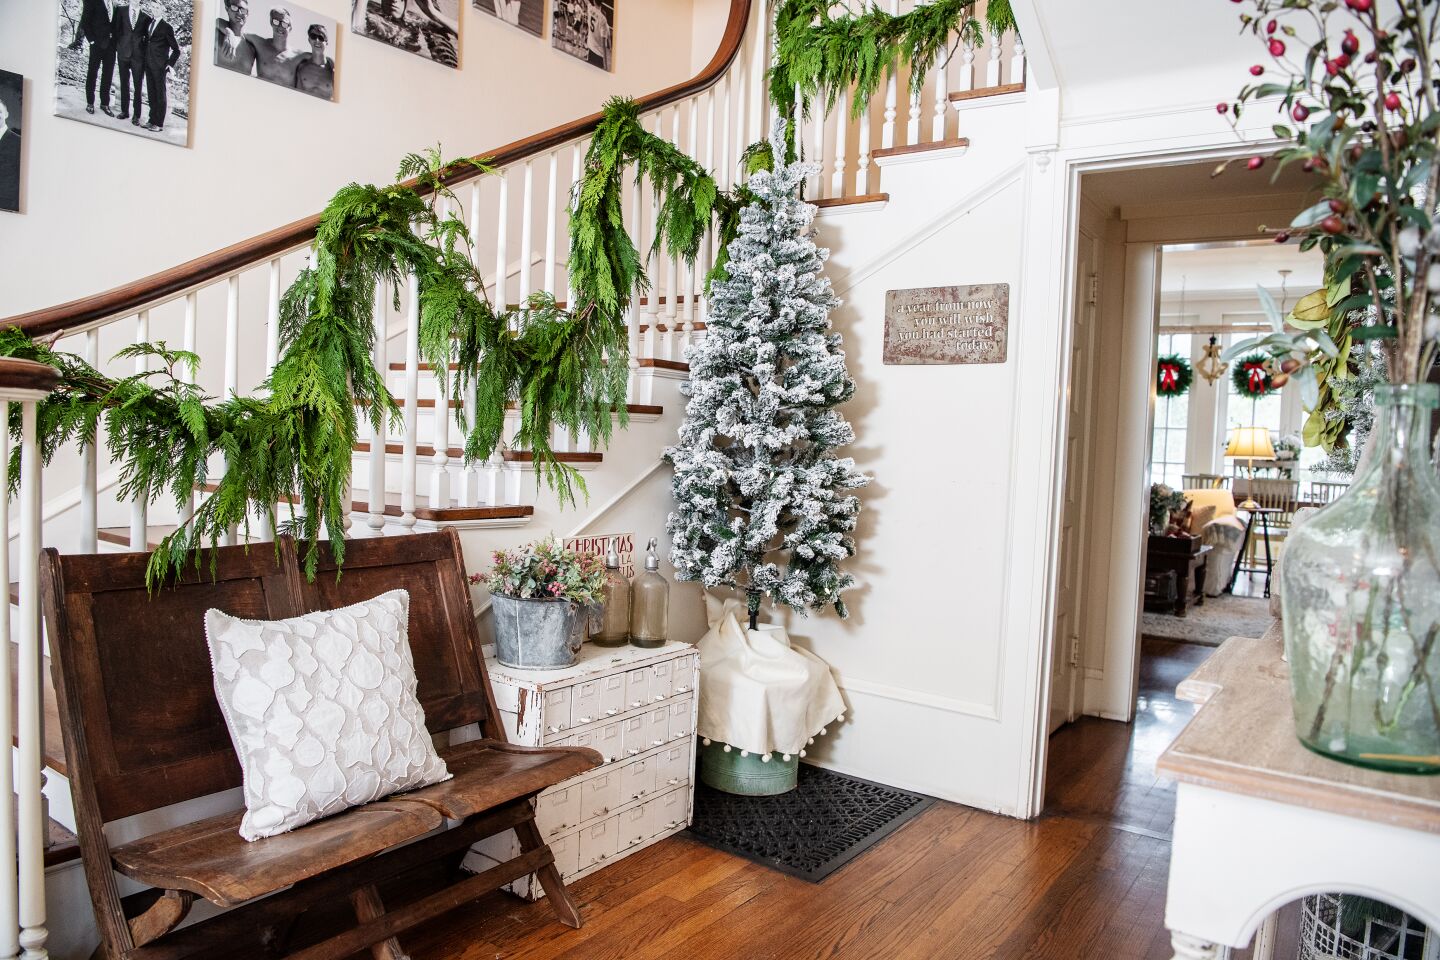 Home for the holidays with Leslie Saeta of My 100 Year Old Home